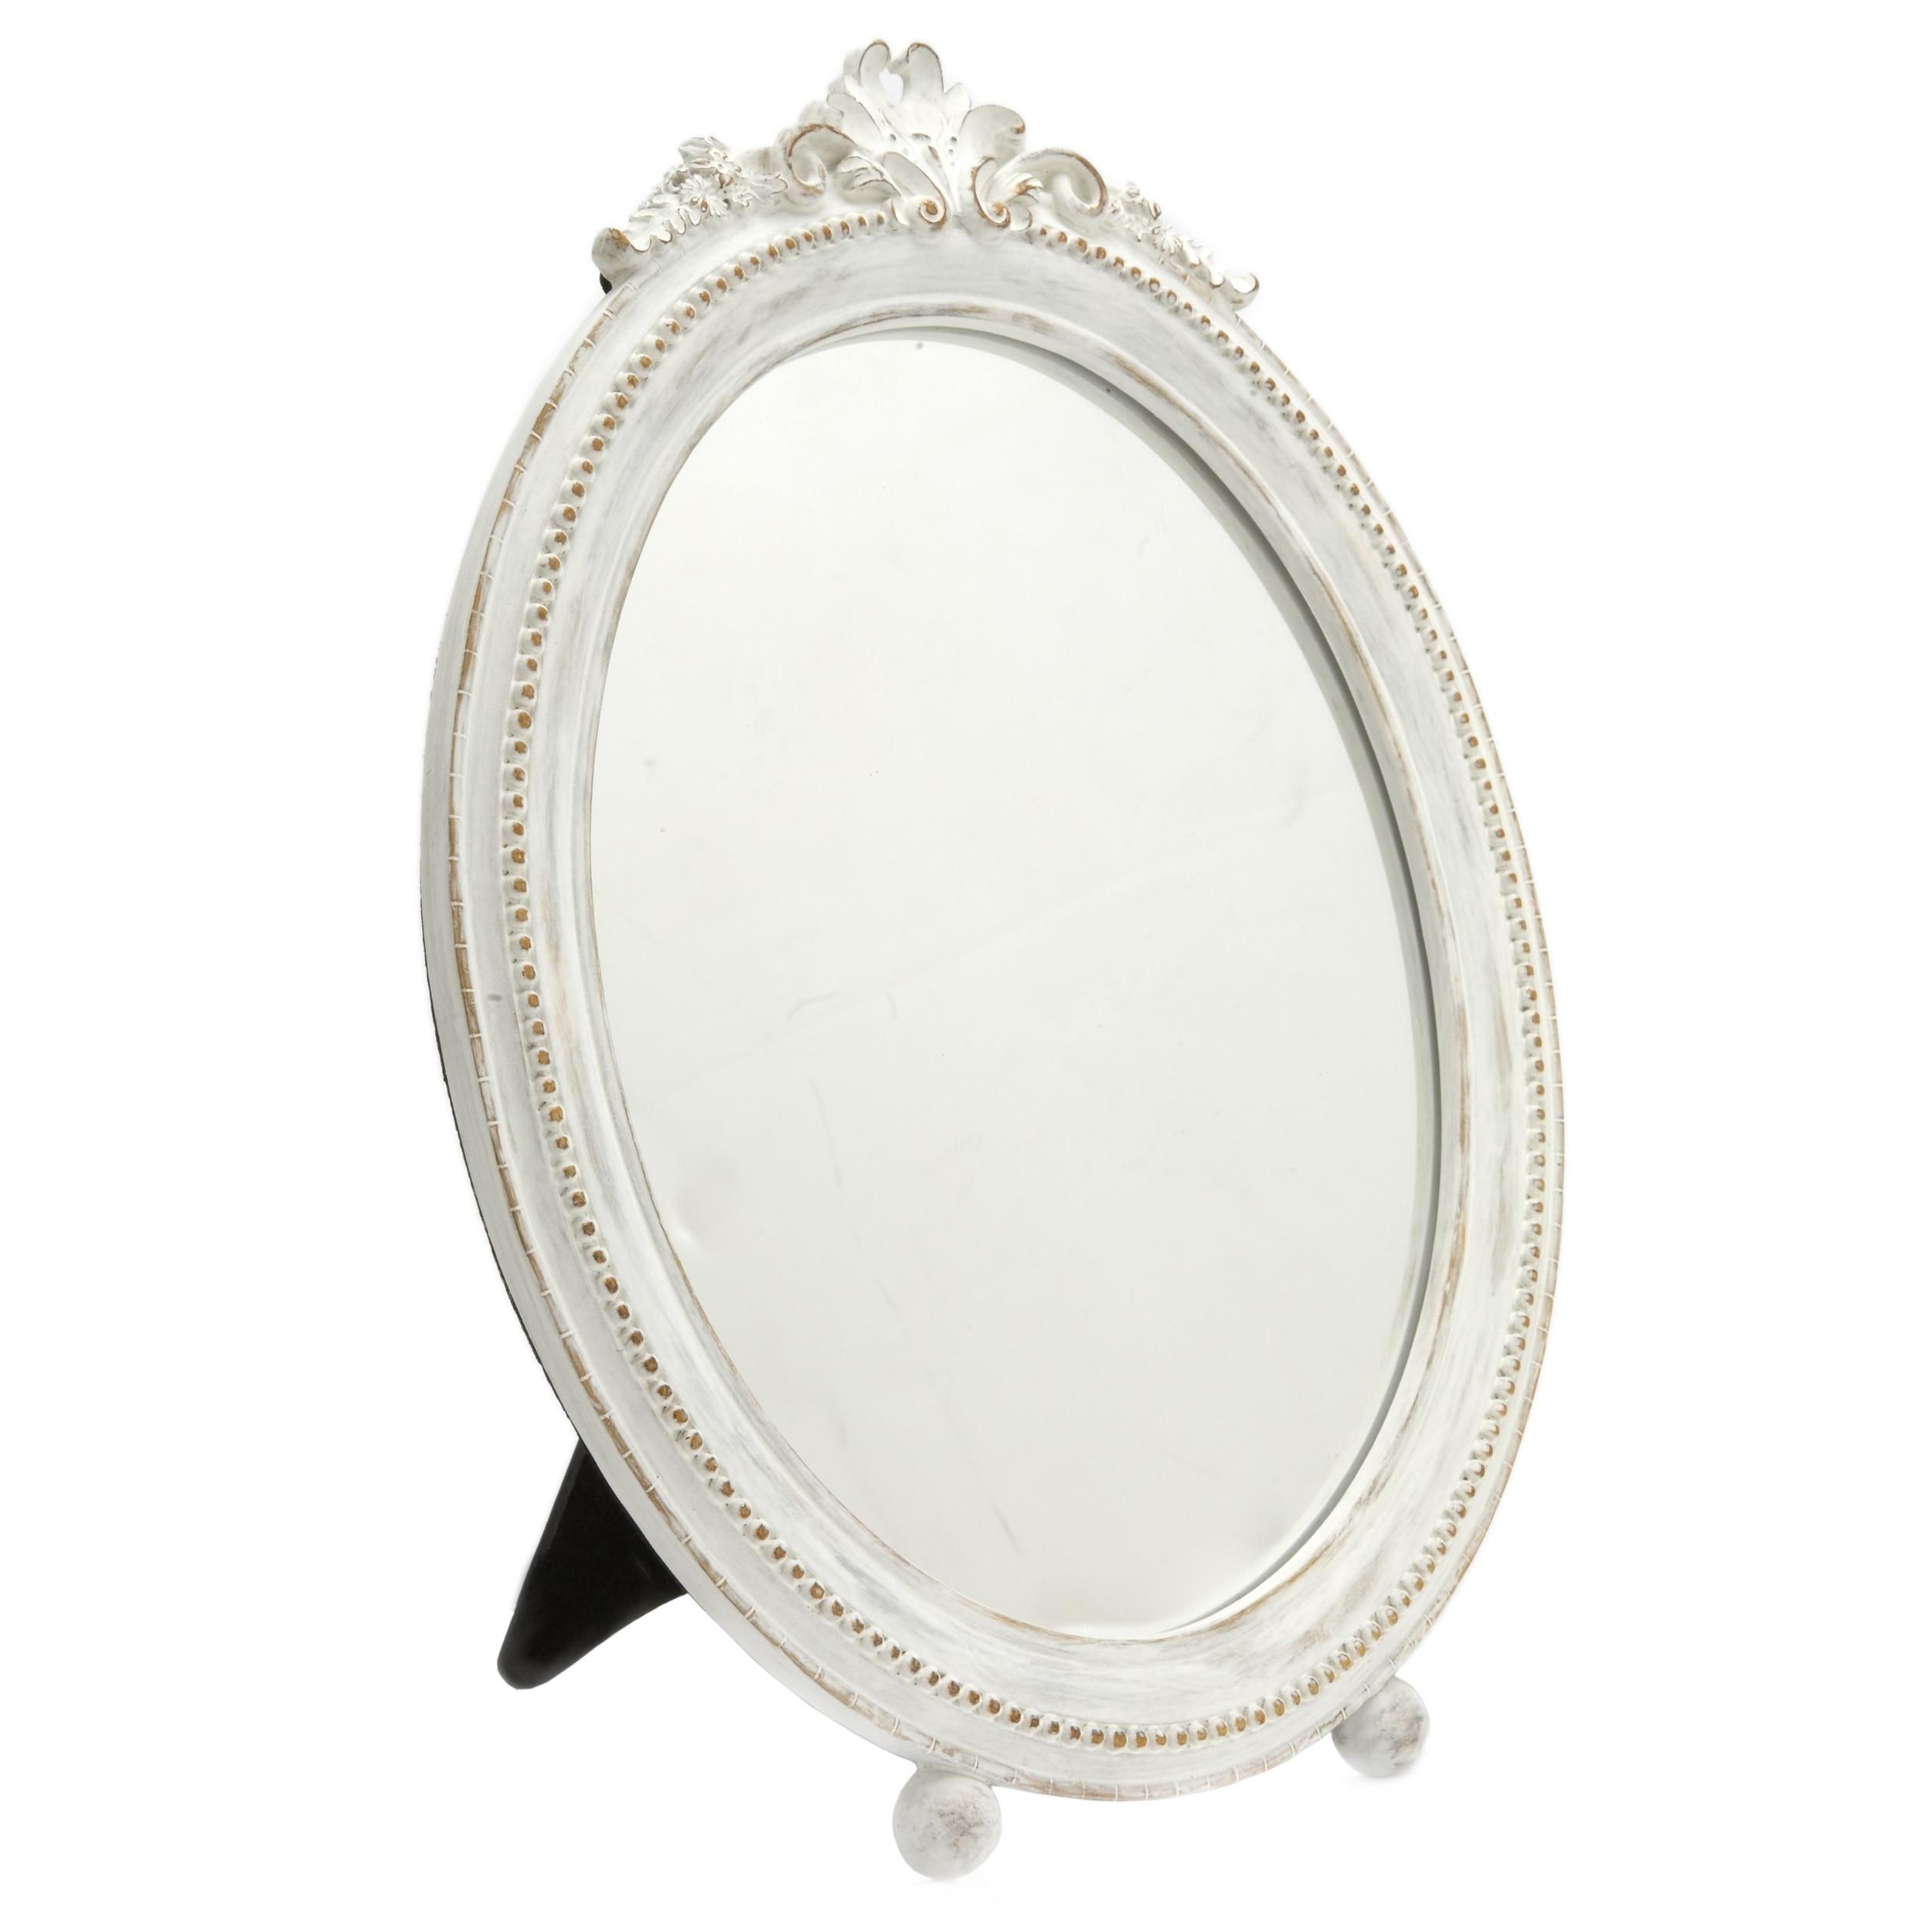 20 Small Free Standing Mirrors Mirror Ideas